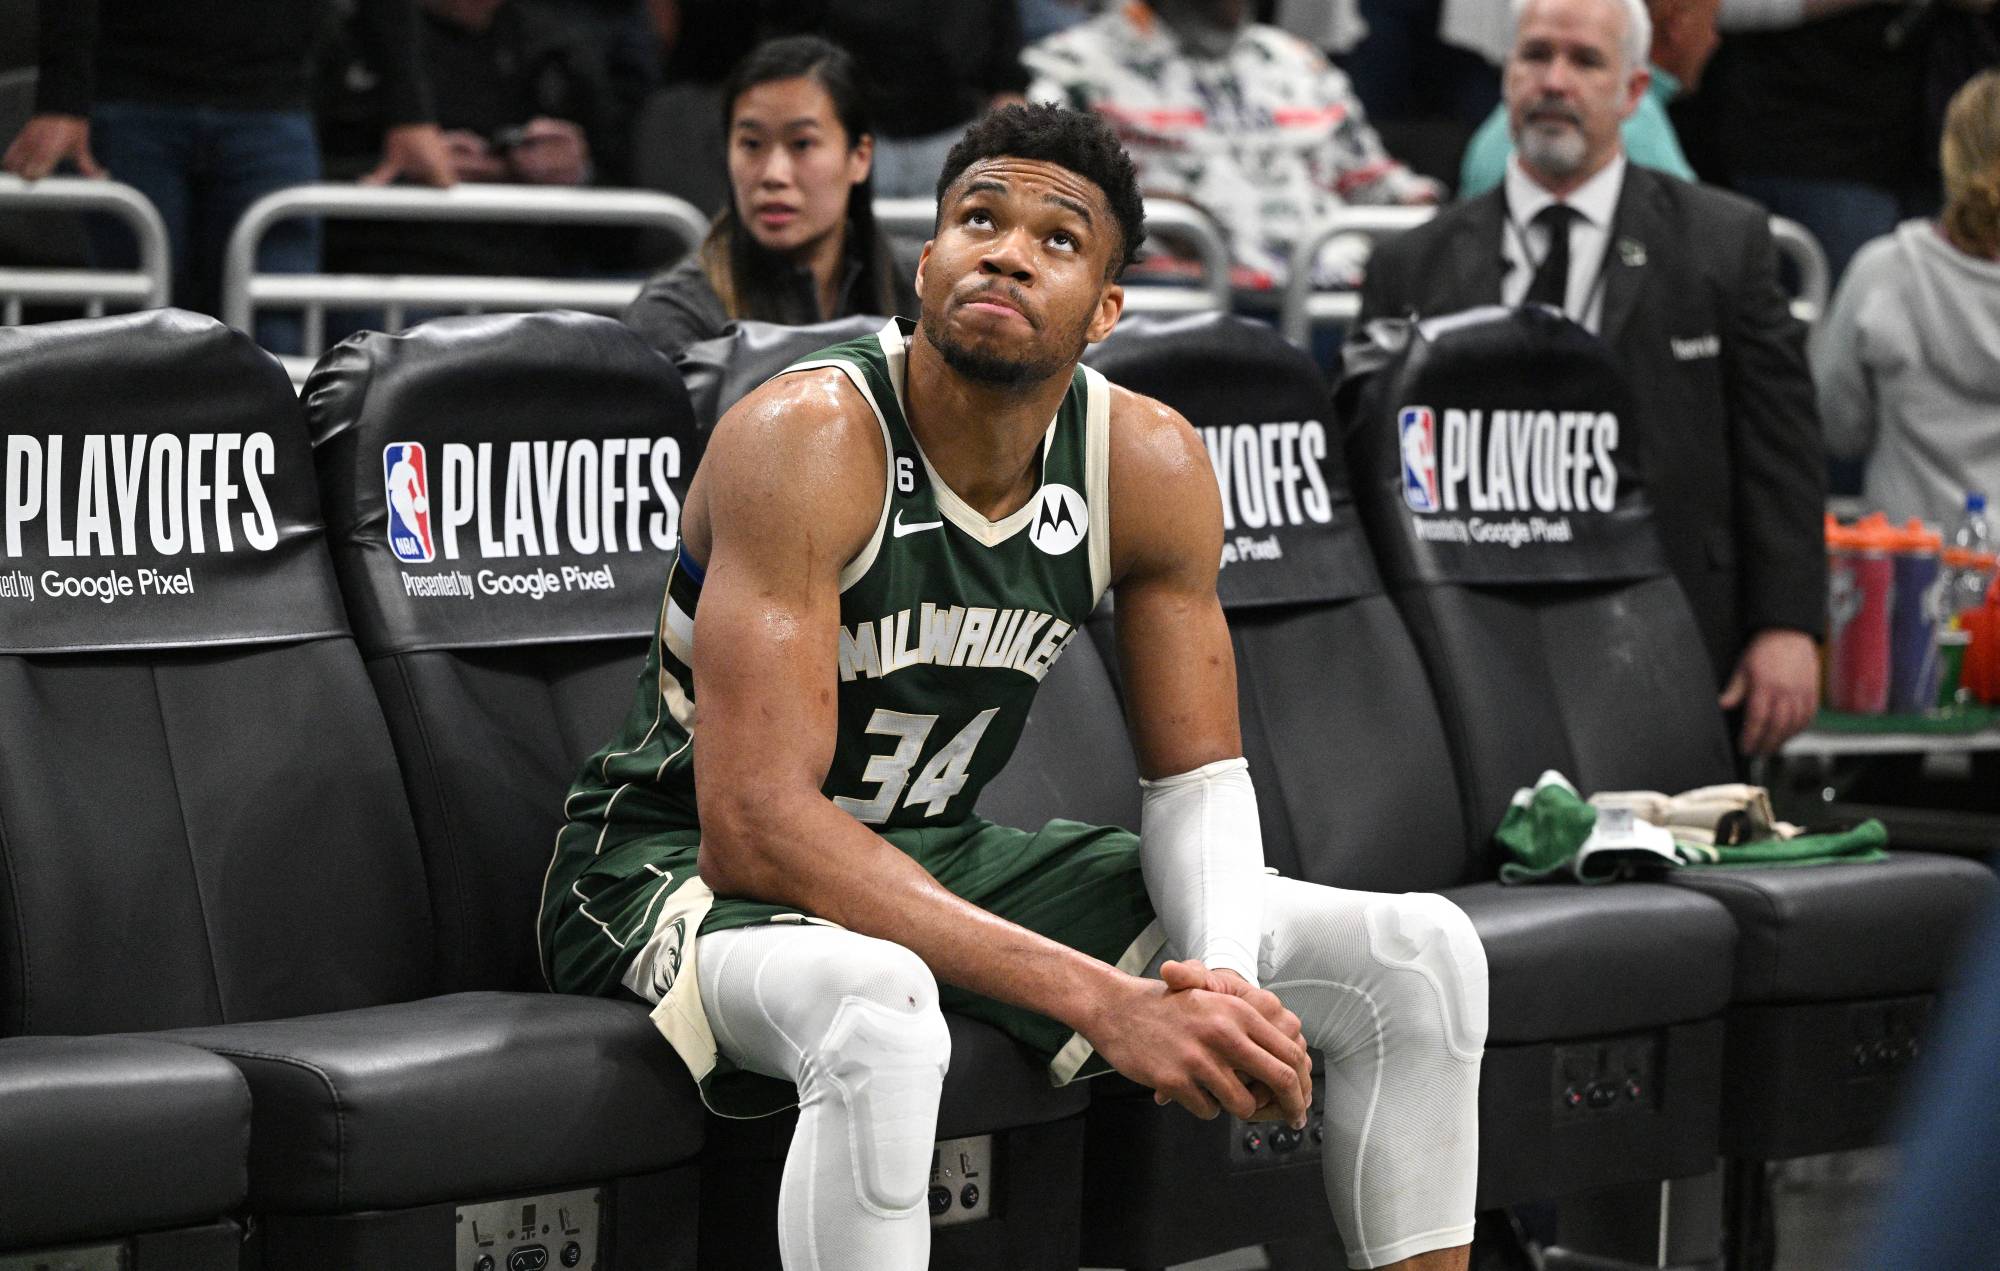 NBA All Star Game: Giannis Antetokounmpo reveals WHY he LOST MVP